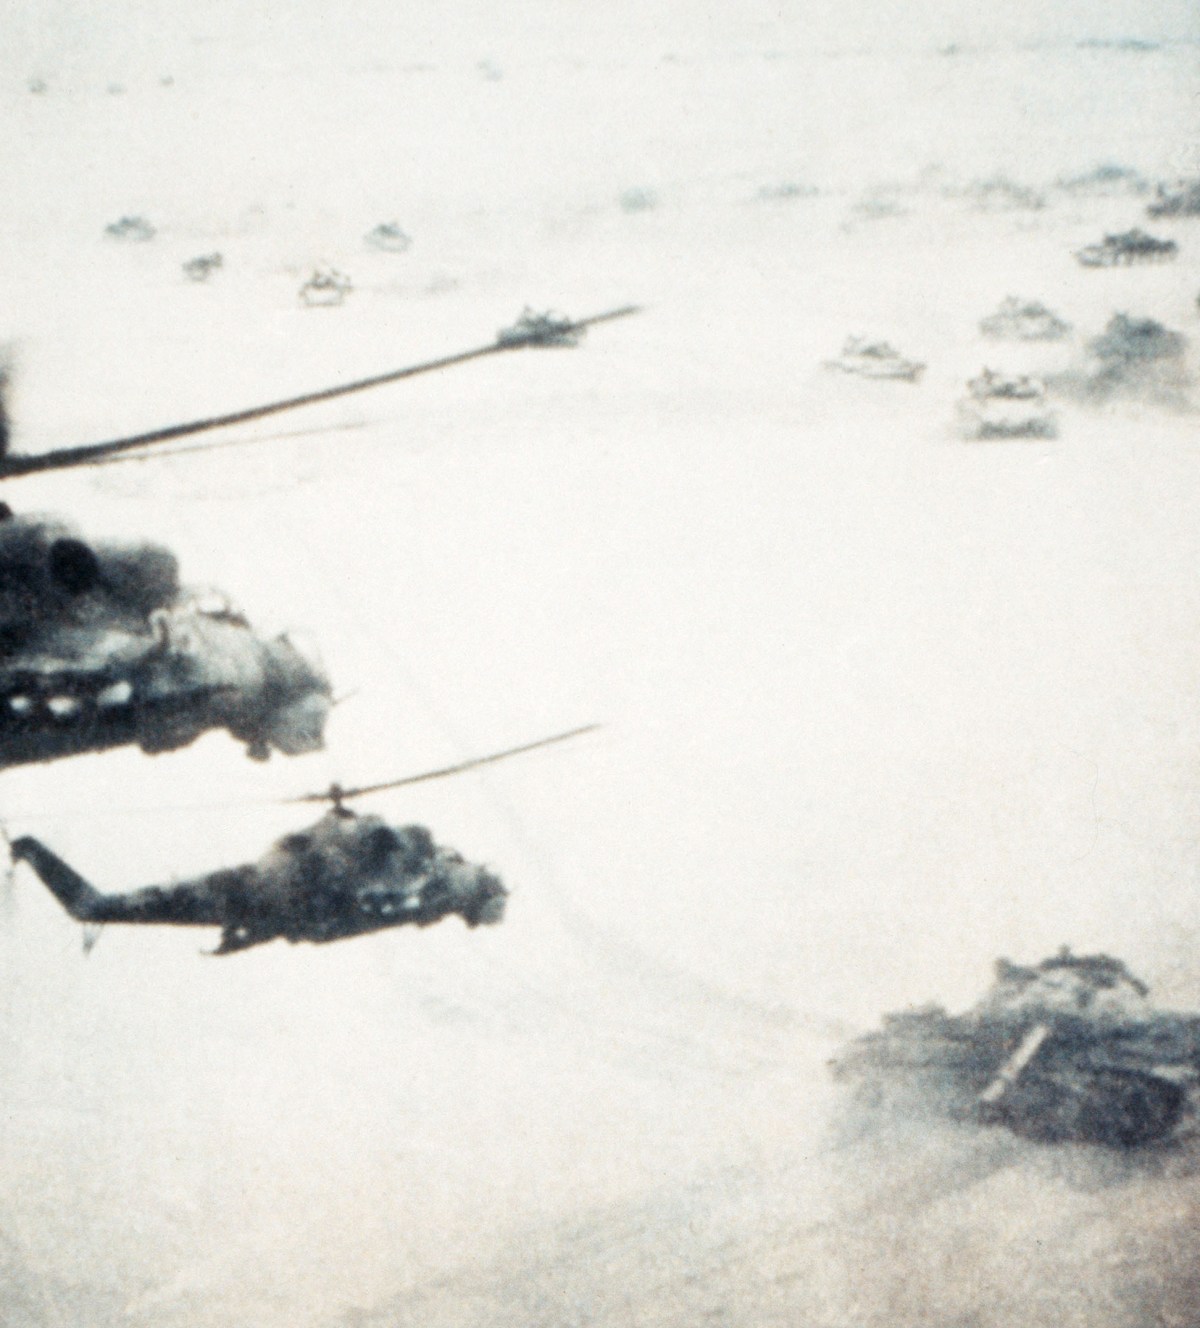 Soviet helicopters and tanks fighting the Mujahideen in Afghanistan